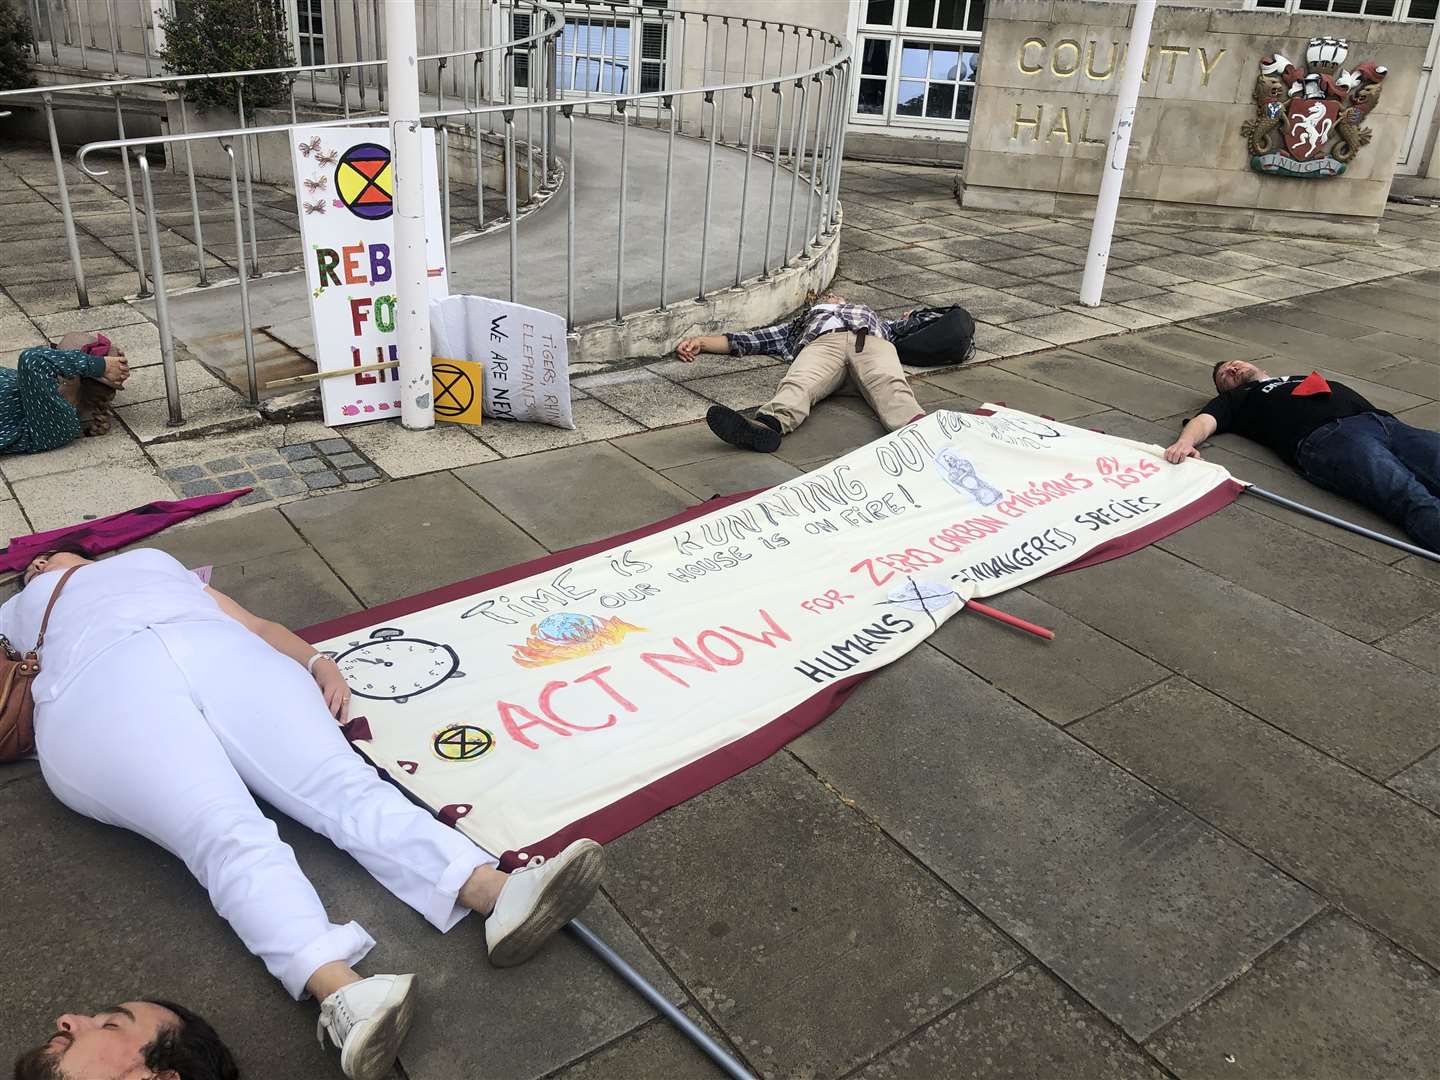 Extinction Rebellion protesters staged a "die-in" outside County Hall in Maidstone